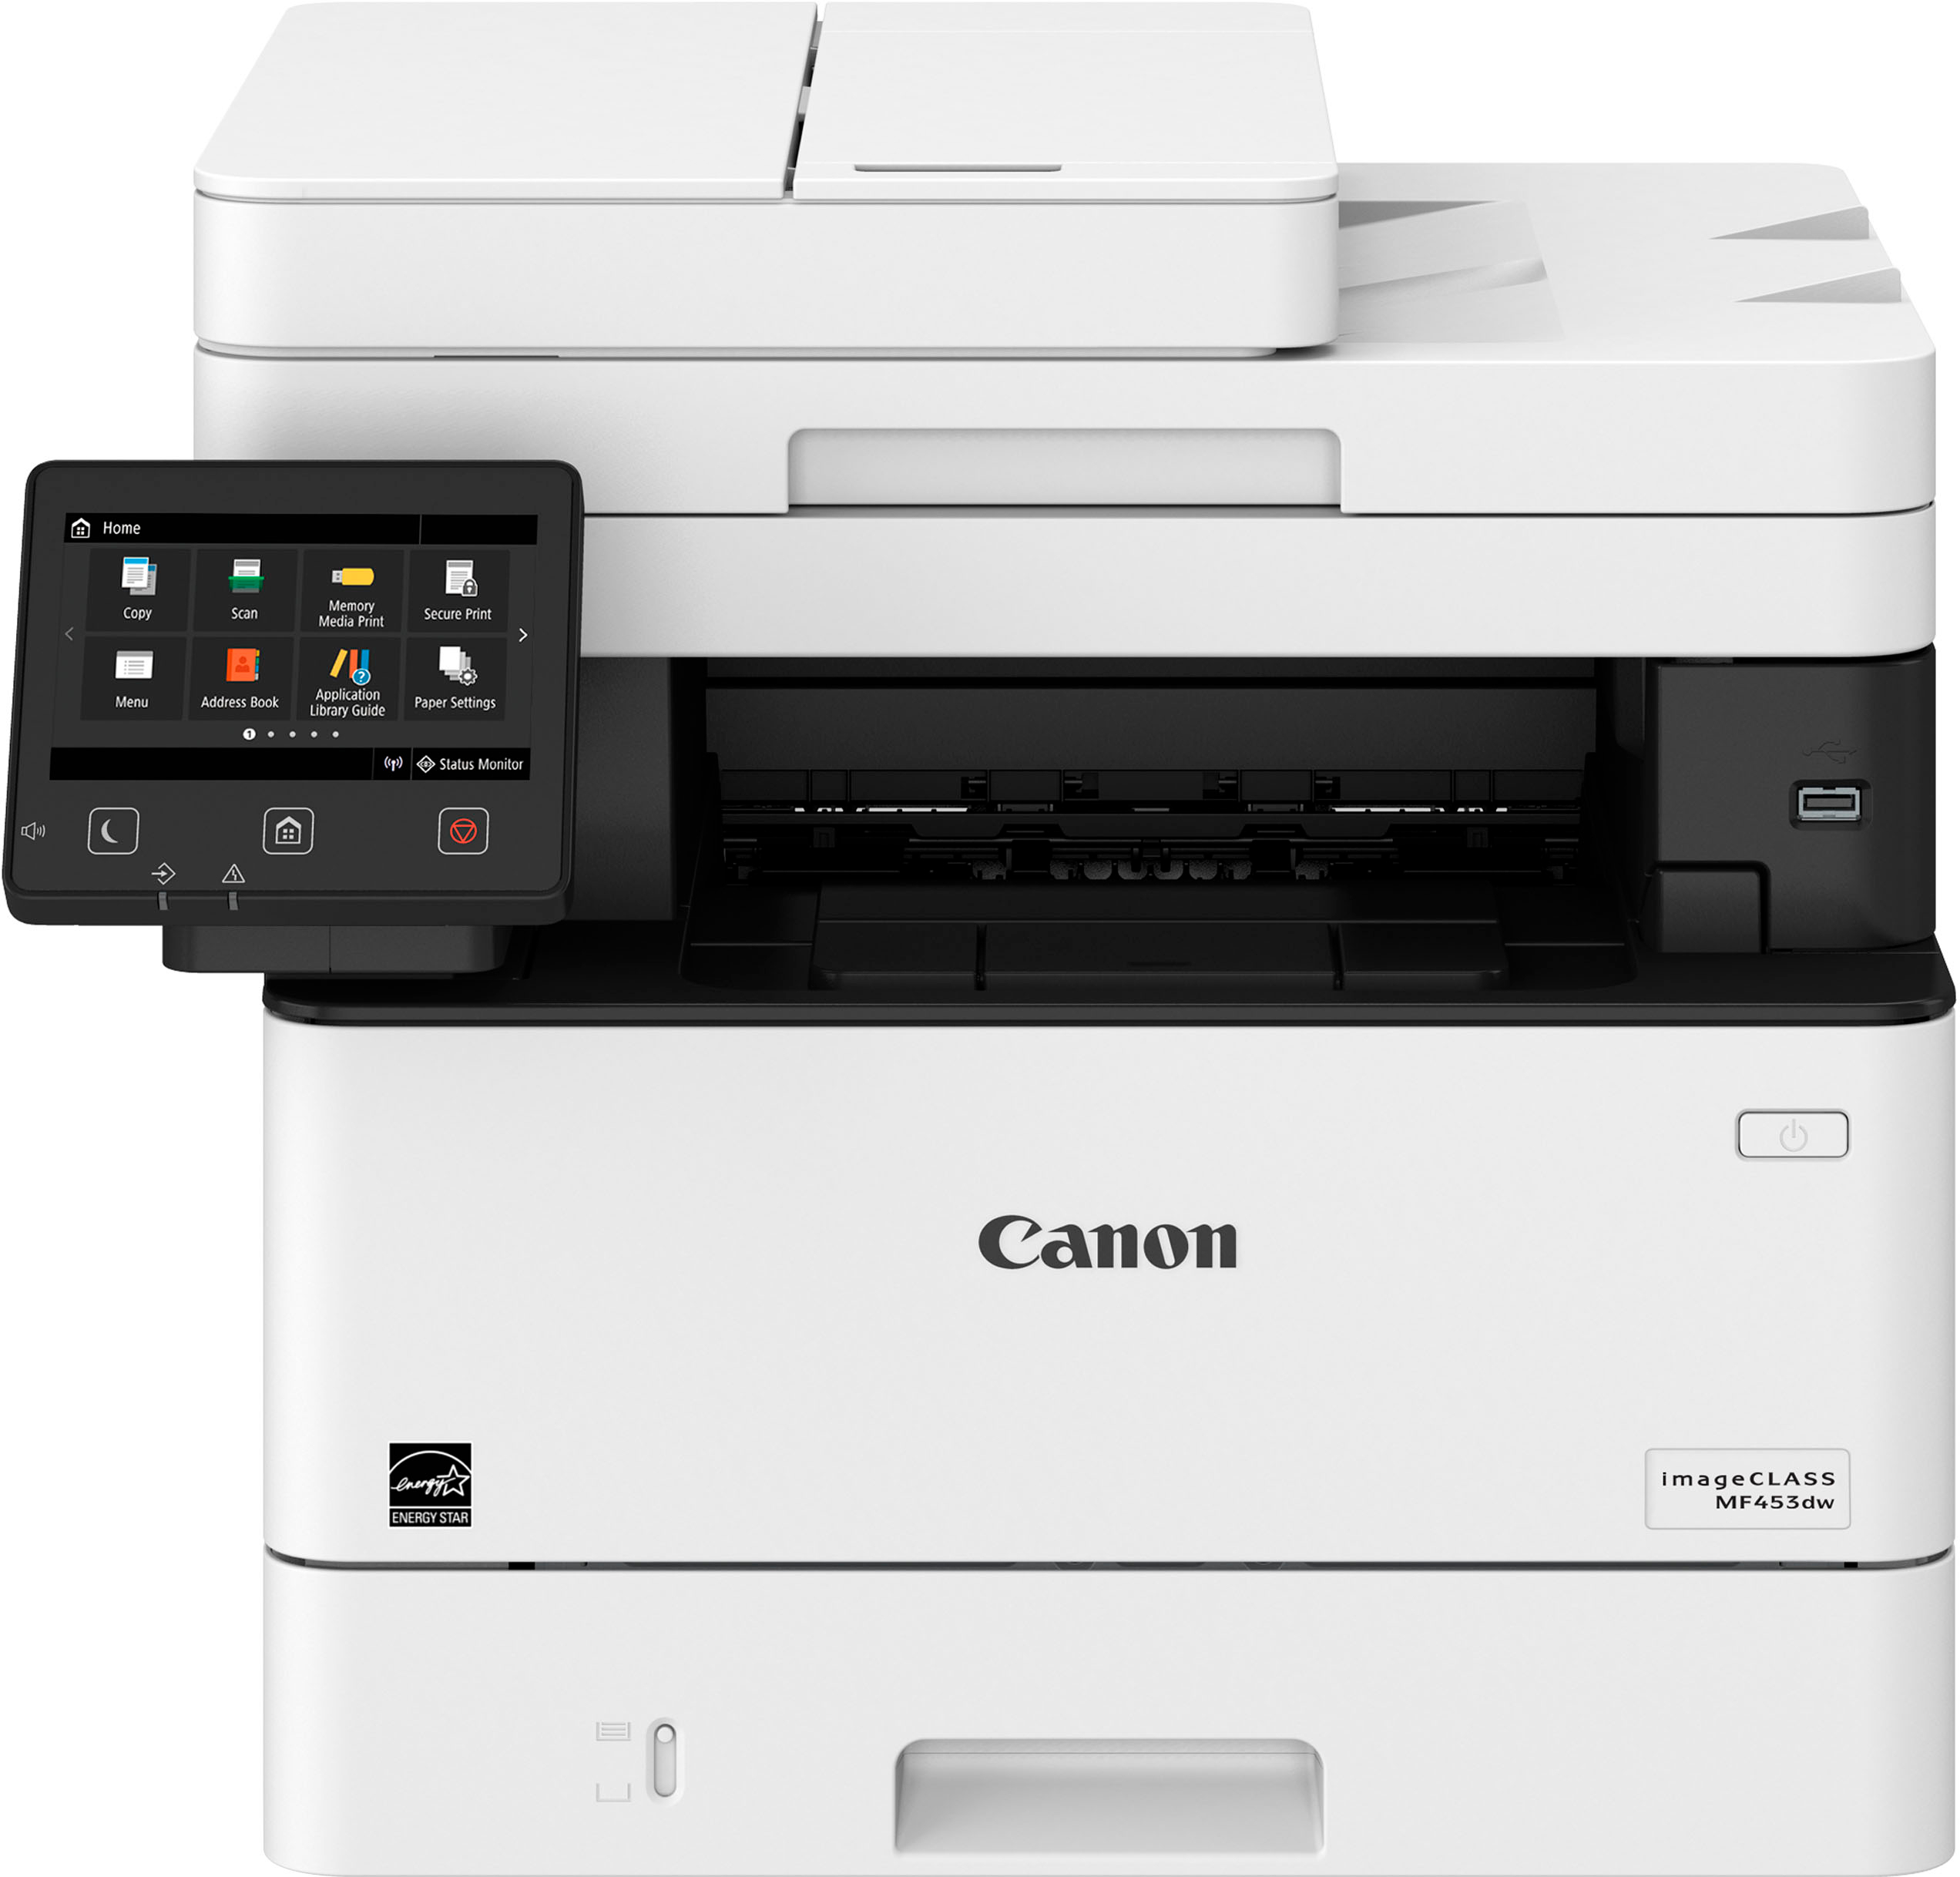 Canon MF453dw Wireless Black-and-White All-In-One Laser Printer 5161C011 - Best Buy